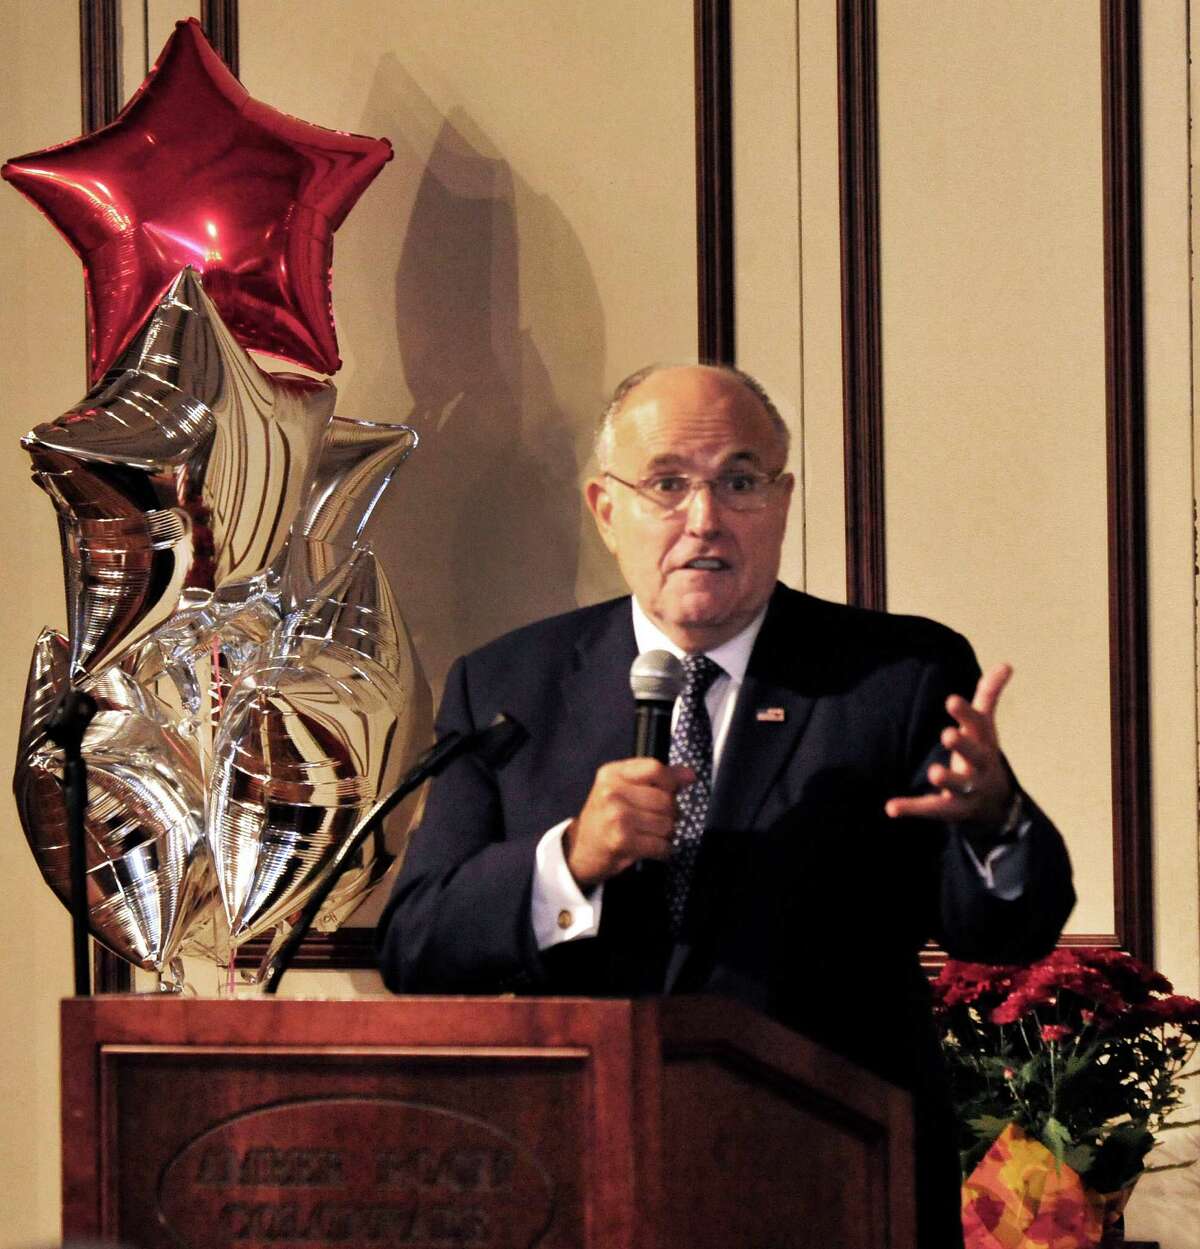 Rudy Giuliani speaks at the Amber Room Colonnade during the Annual Fall Celebrity Breakfast for Catholic Charities of Greater Danbury, in Danbury, Conn. Thursday, Oct. 24, 2013.